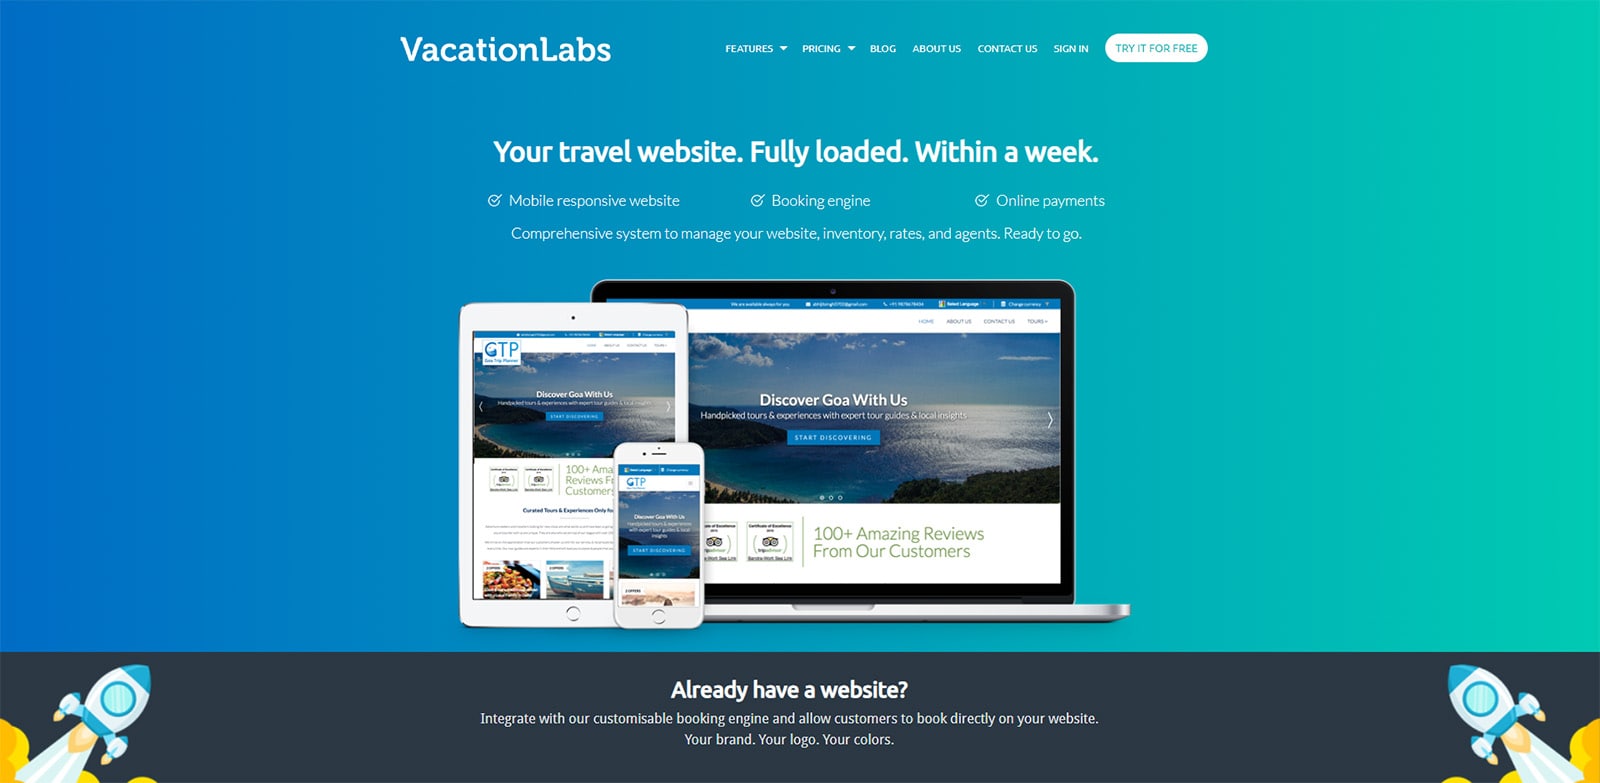 Picture of VacationLabs, a user-friendly website builder for travel agencies and hotels with a mobile app & channel manager.